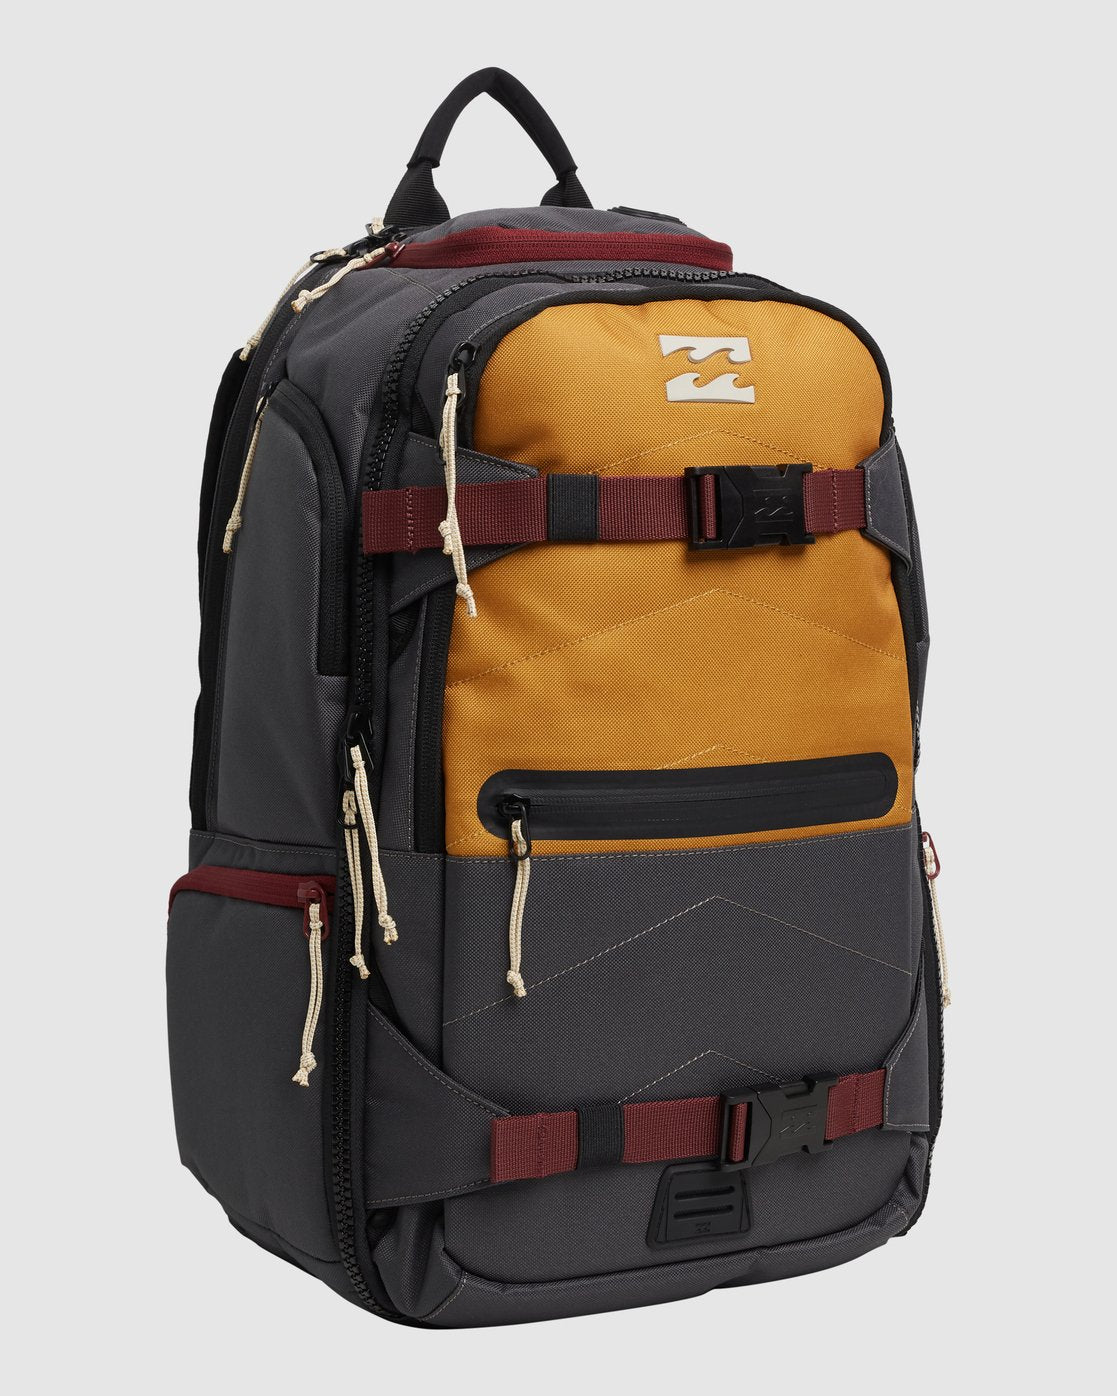 billabong backpack combat multicoloured mustard yellow burnt red charcoal multiple pockets buckle zip